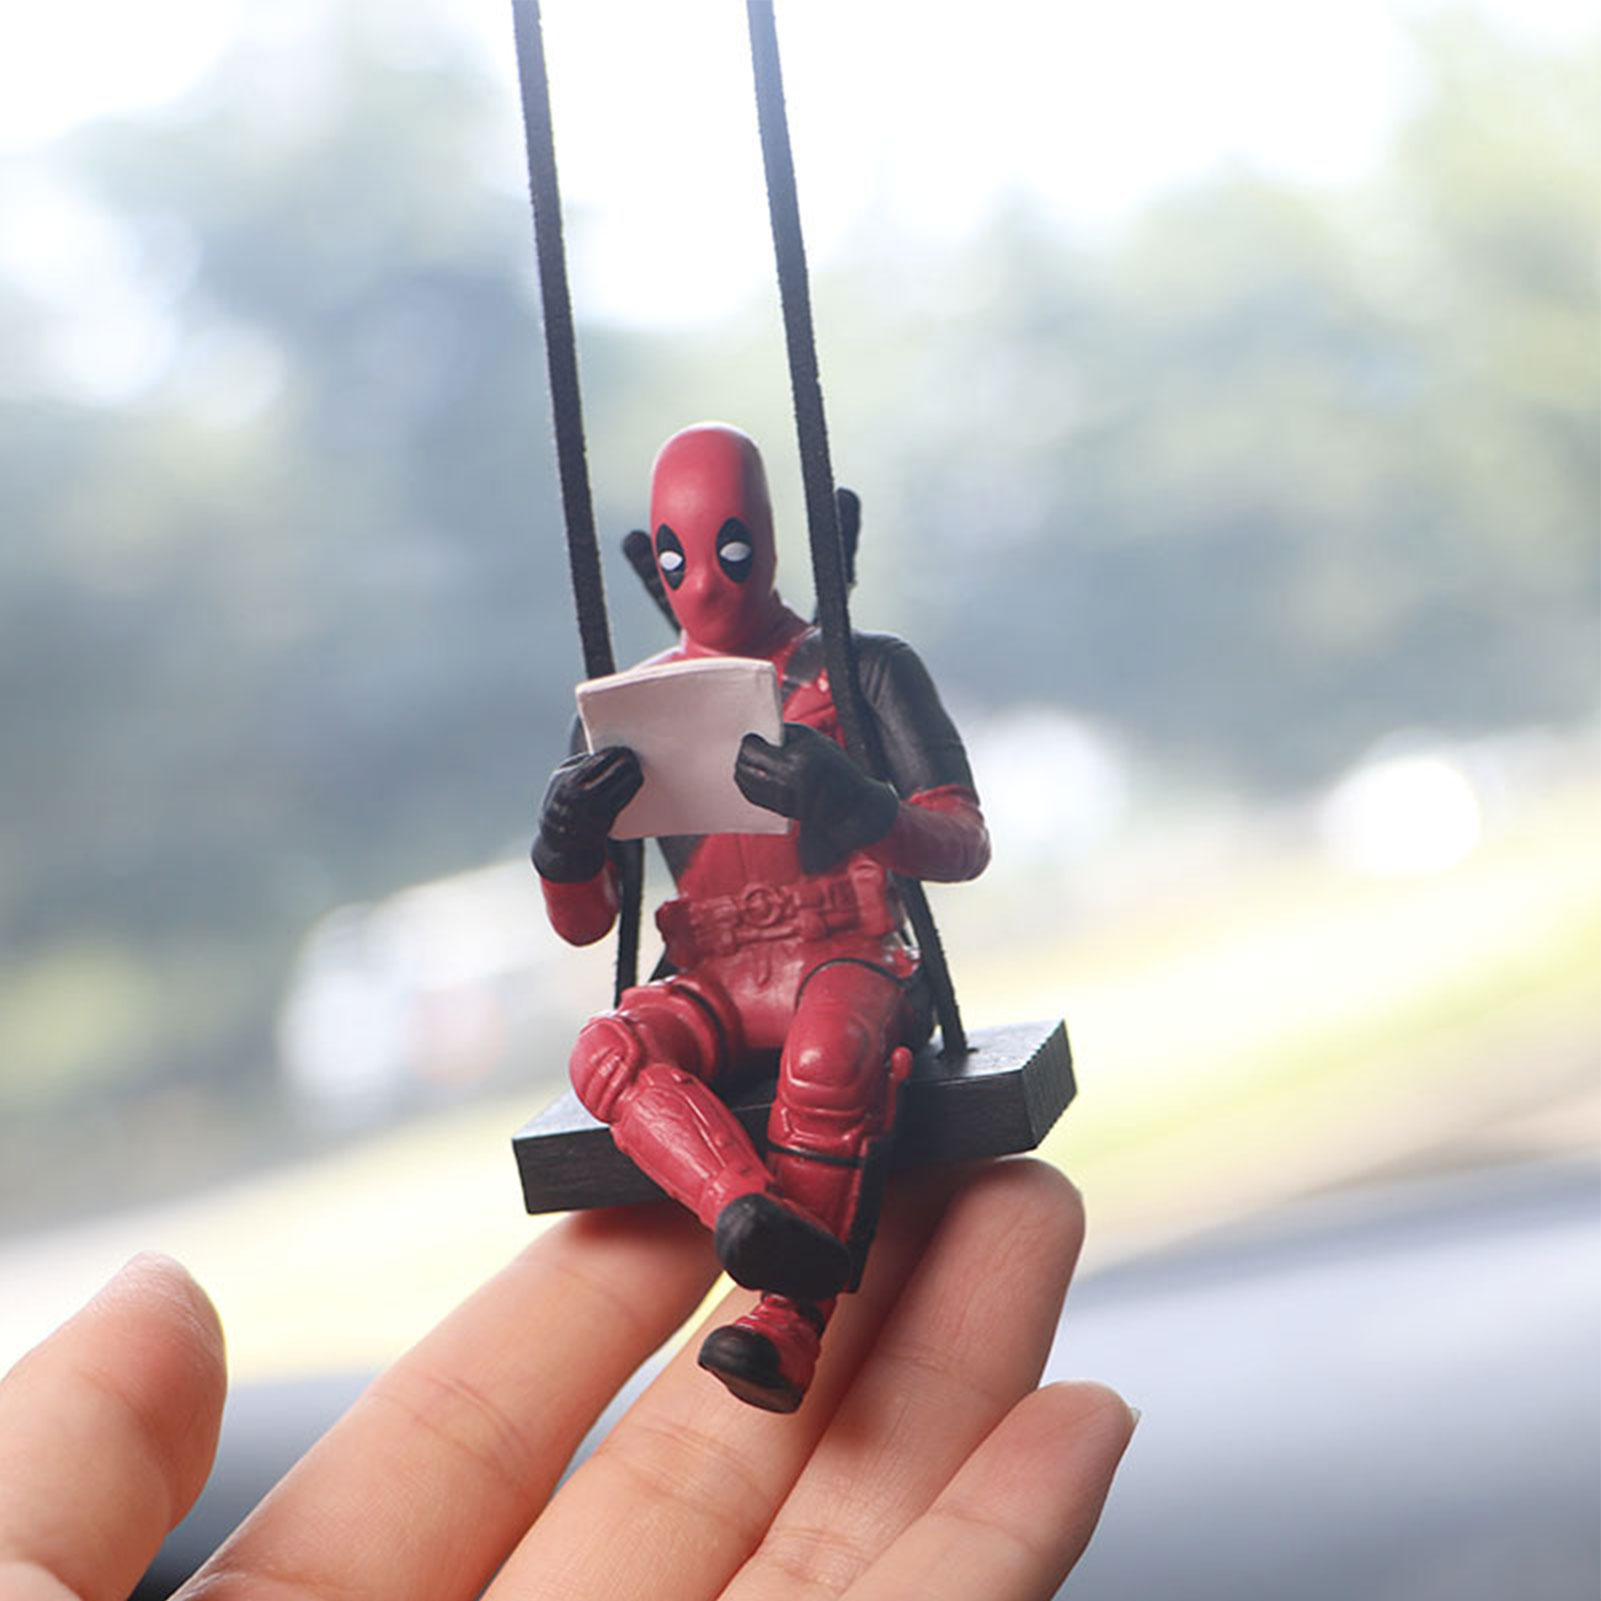 https://apgifto.com/wp-content/uploads/2023/09/2022-New-Car-Rearview-Mirror-Pendant-Deadpool-Cartoon-Anime-Car-Hanger-Funny-Car-Winging-Accessories-For.jpg